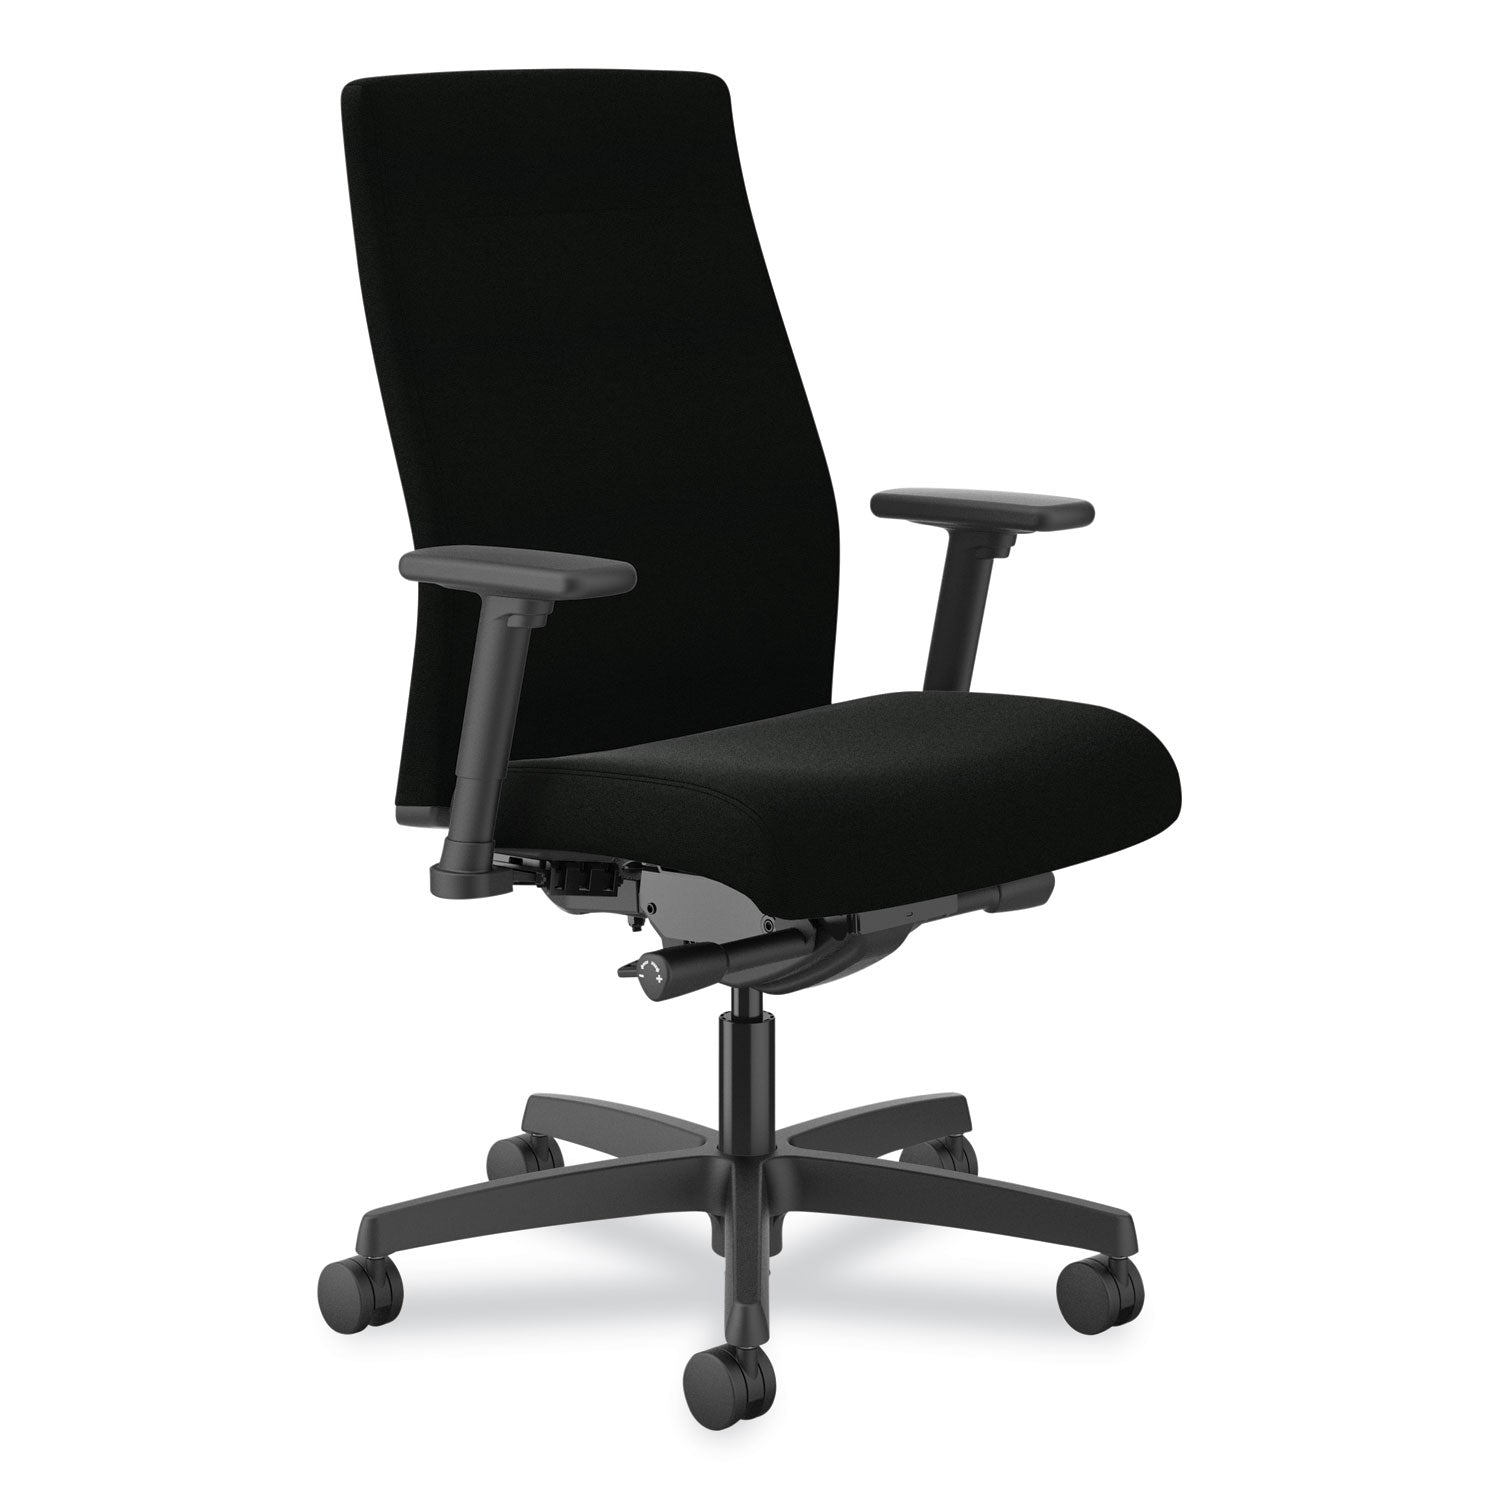 ignition-20-upholstered-mid-back-task-chair-17-to-215-seat-height-black-fabric-seat-back-ships-in-7-10-business-days_honi2u2ahur10tk - 1